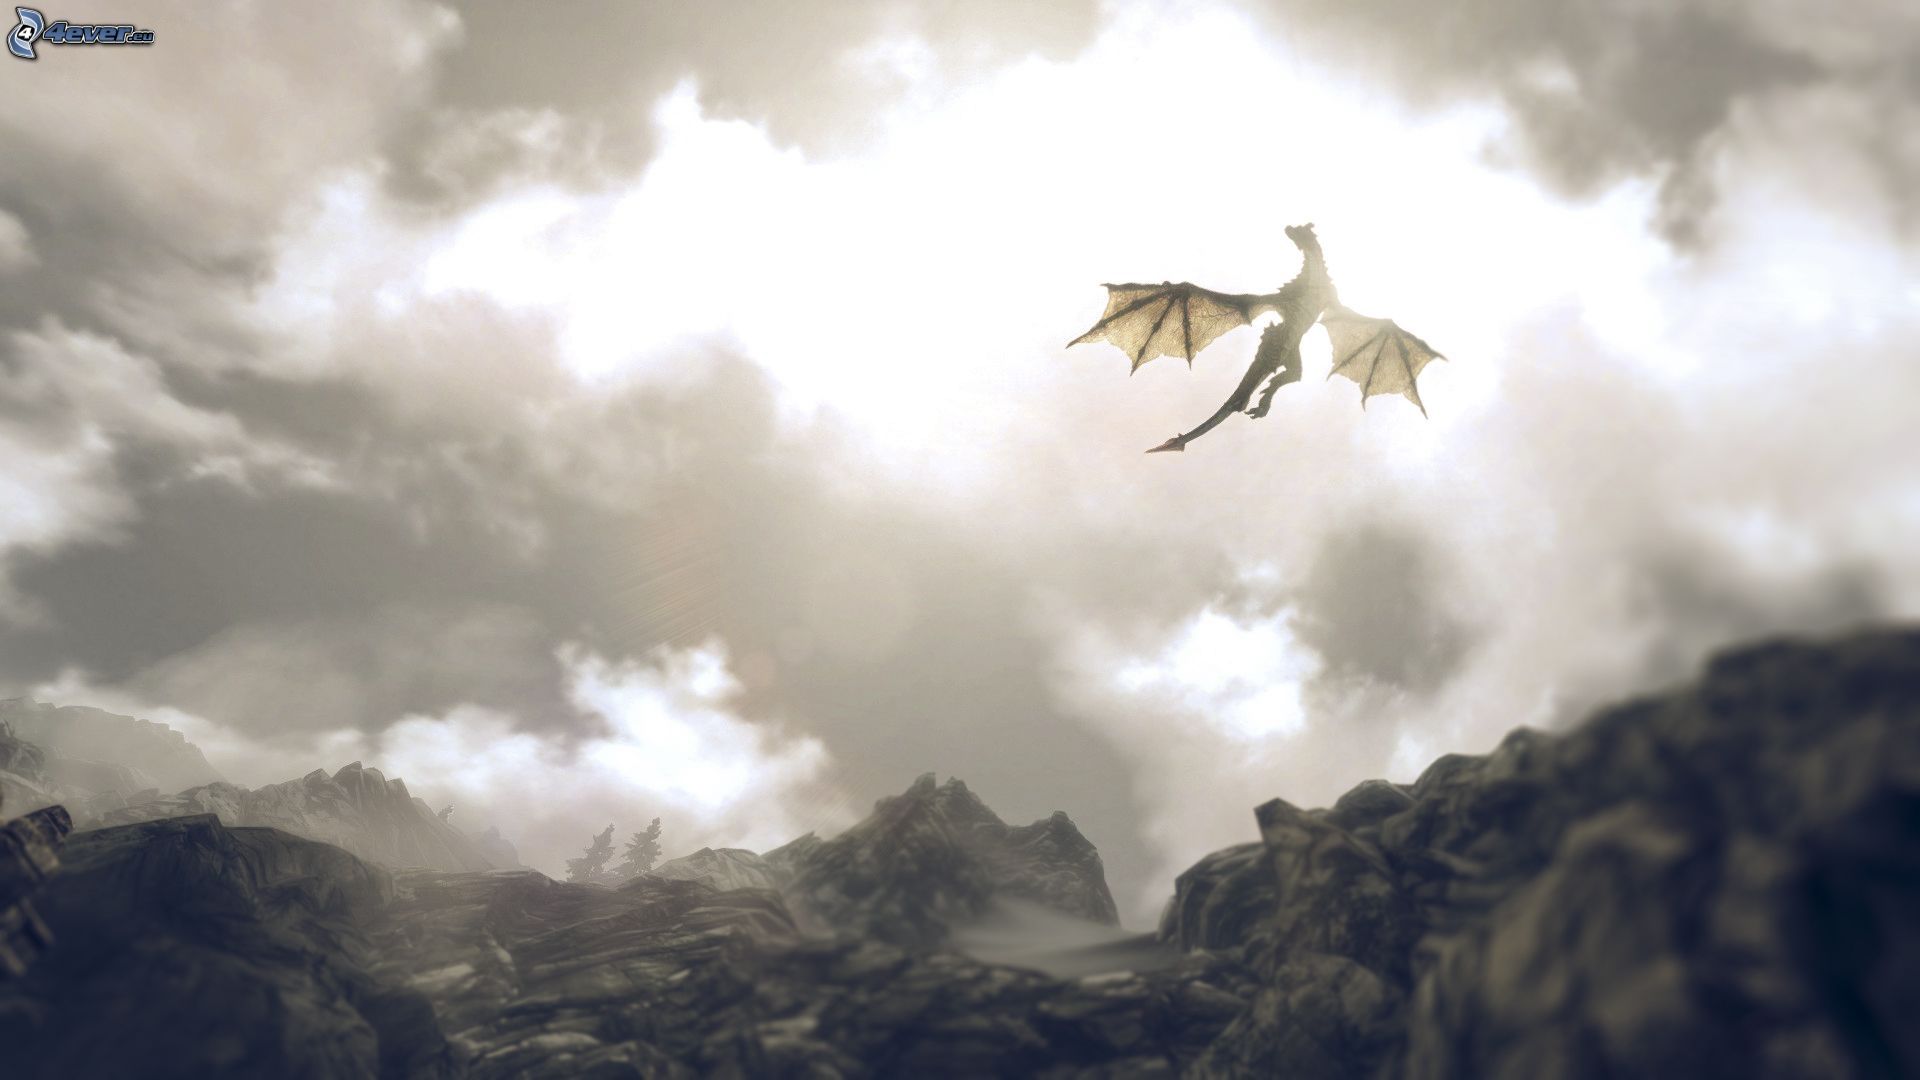 Flying Dragon Over Colorful Cloud Wallpapers